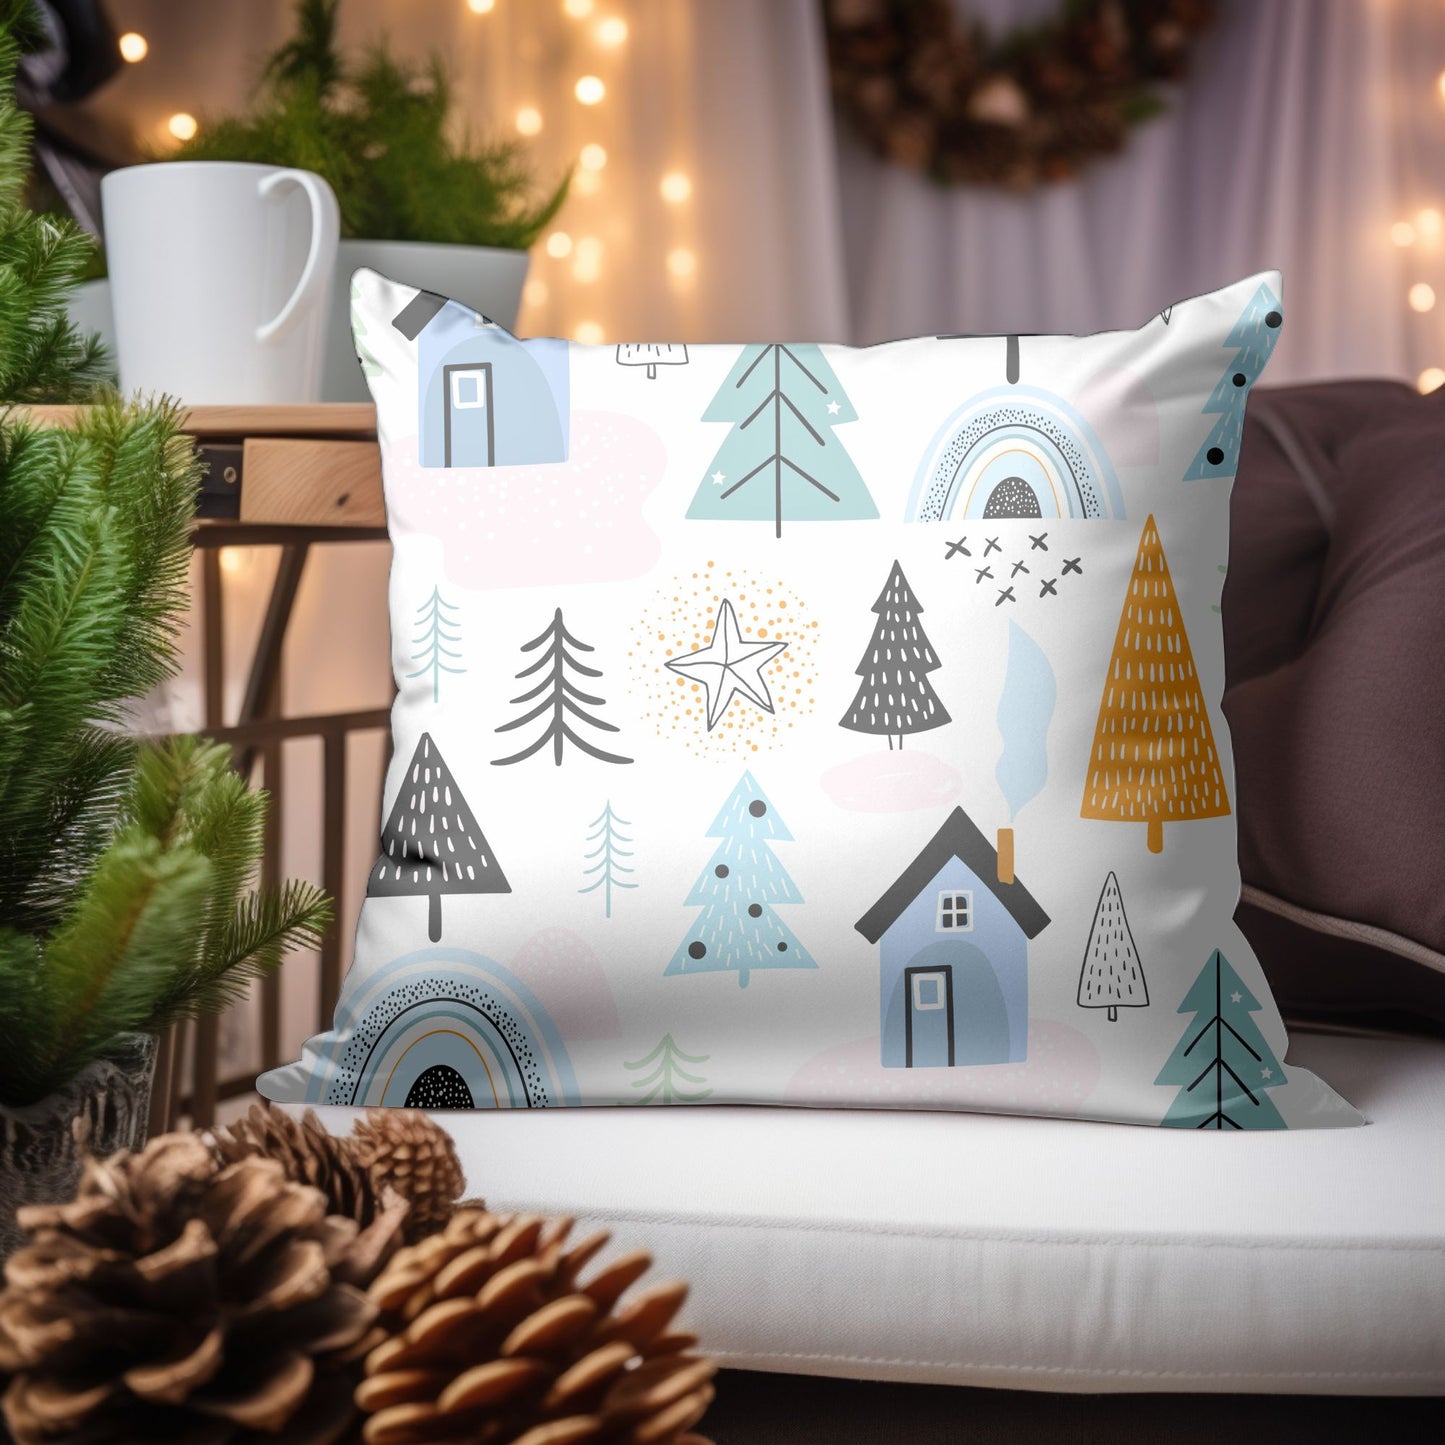 Rustic Holiday-Themed Pillow with Cozy Cabin Design